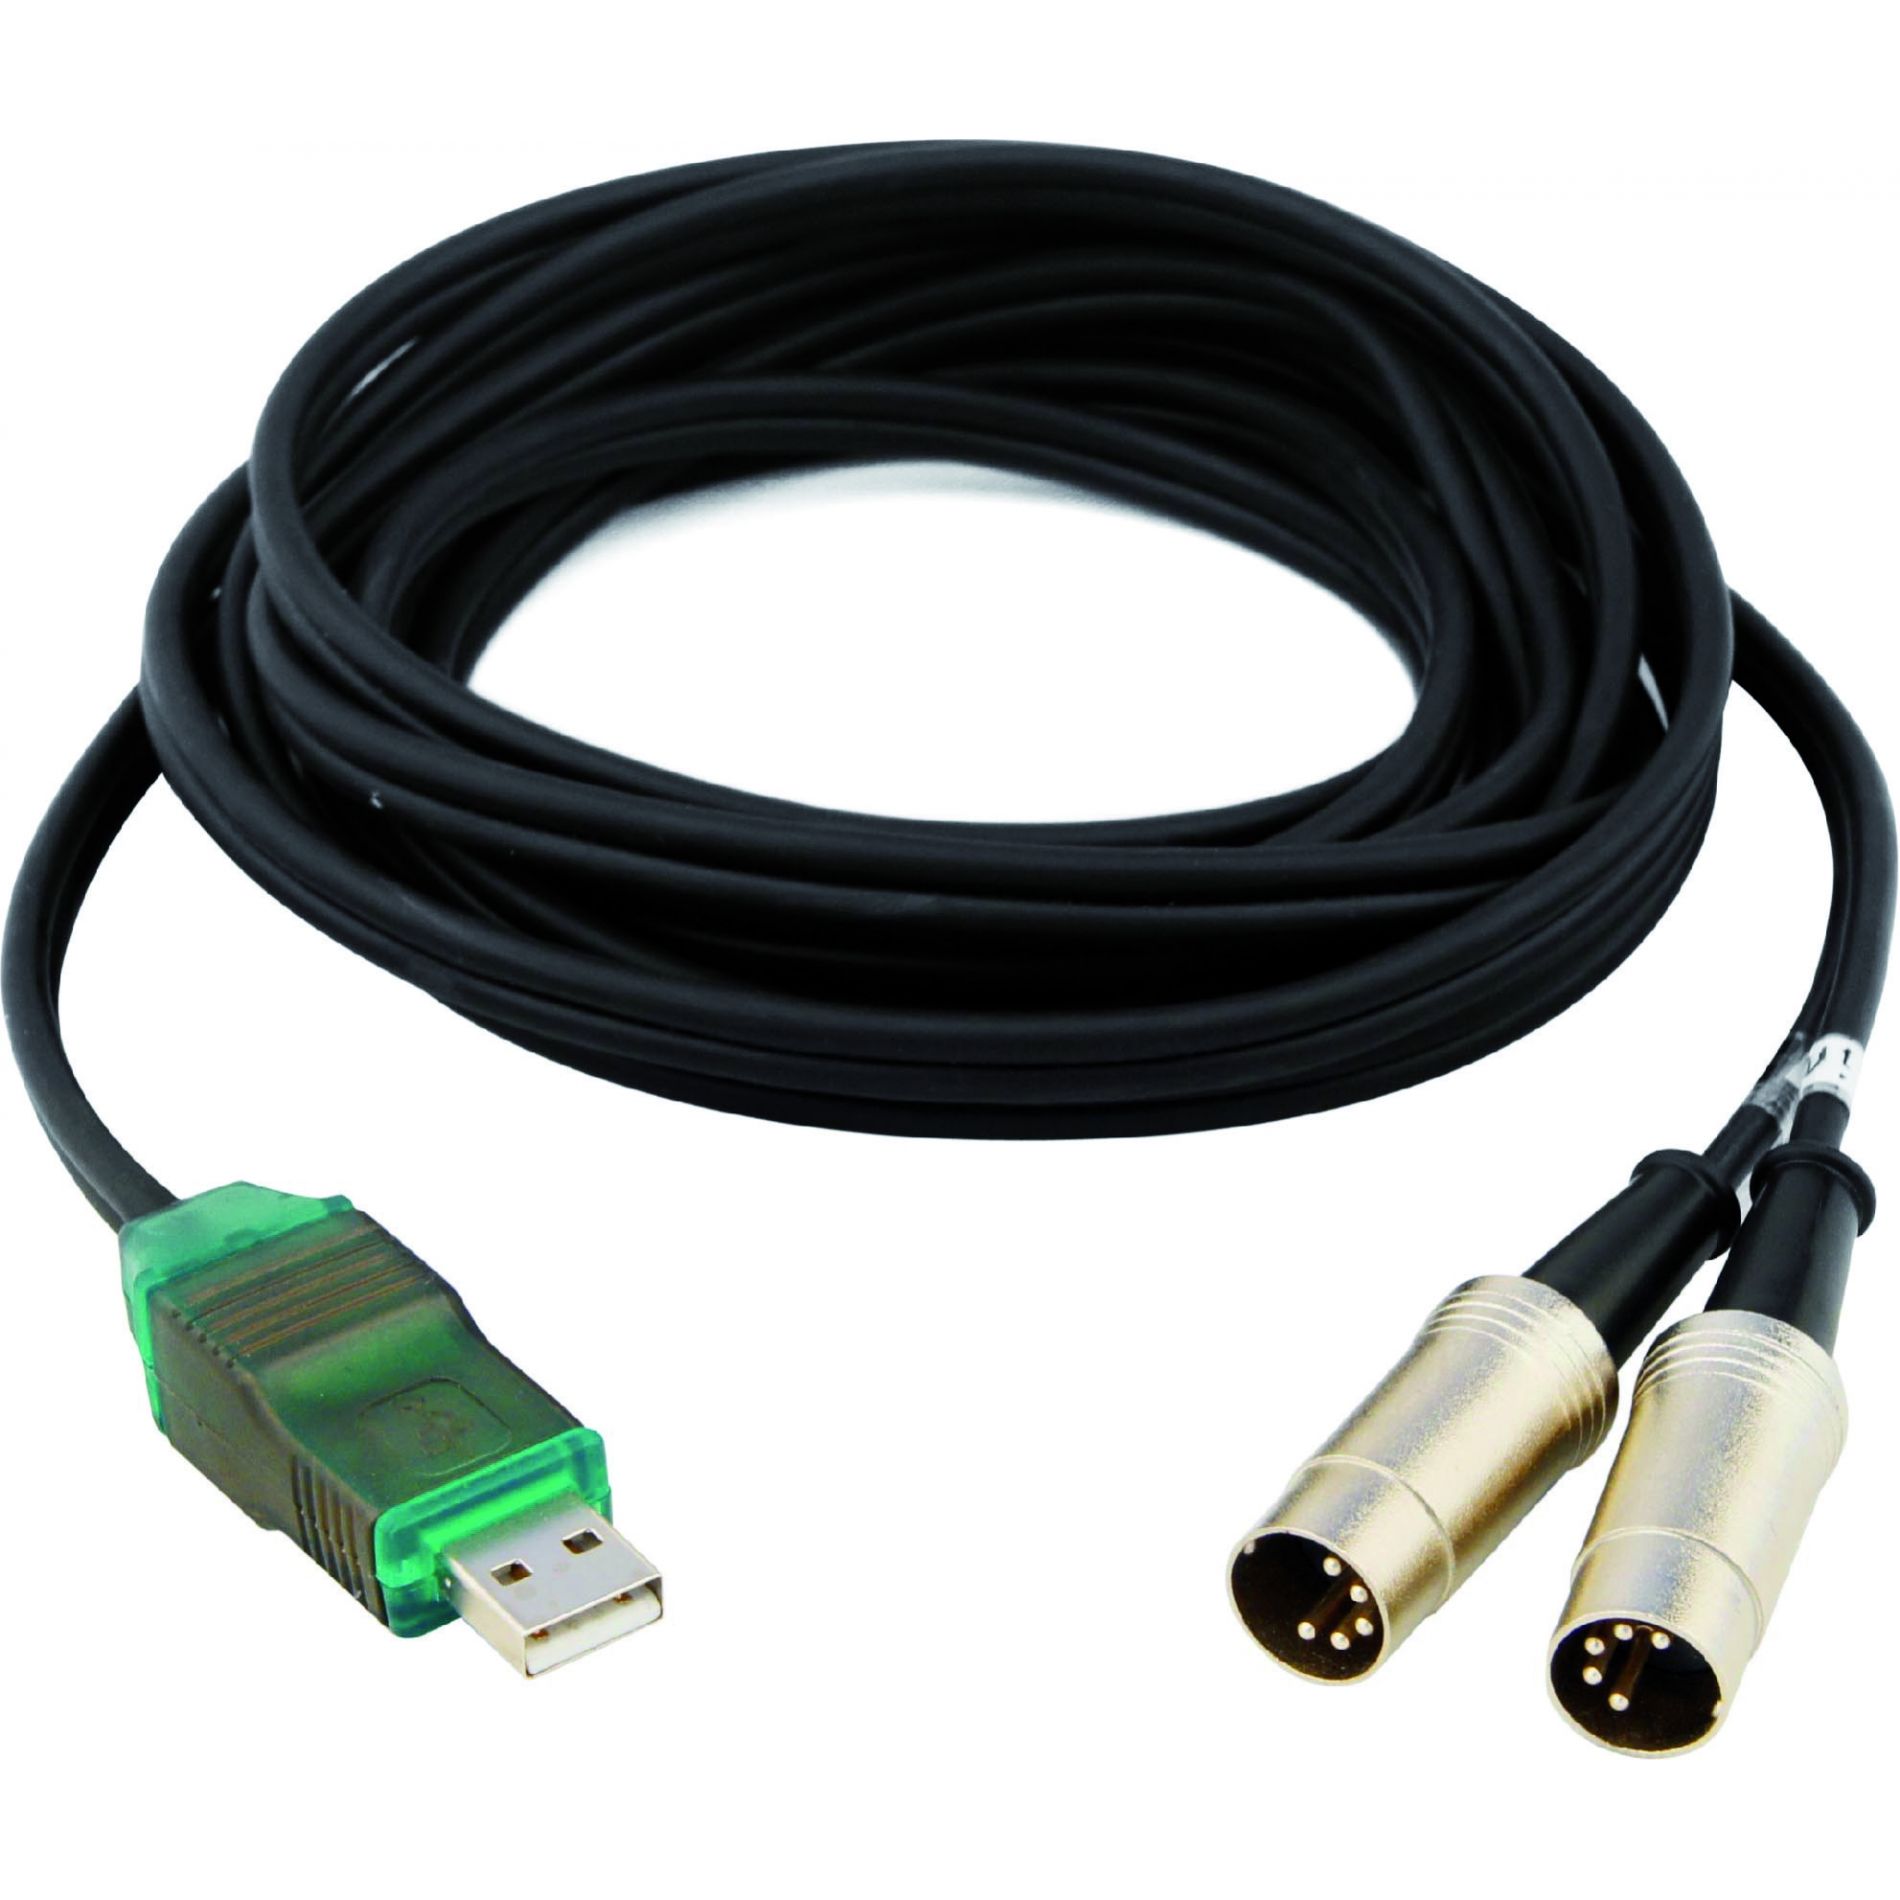 midi to usb cable for mac